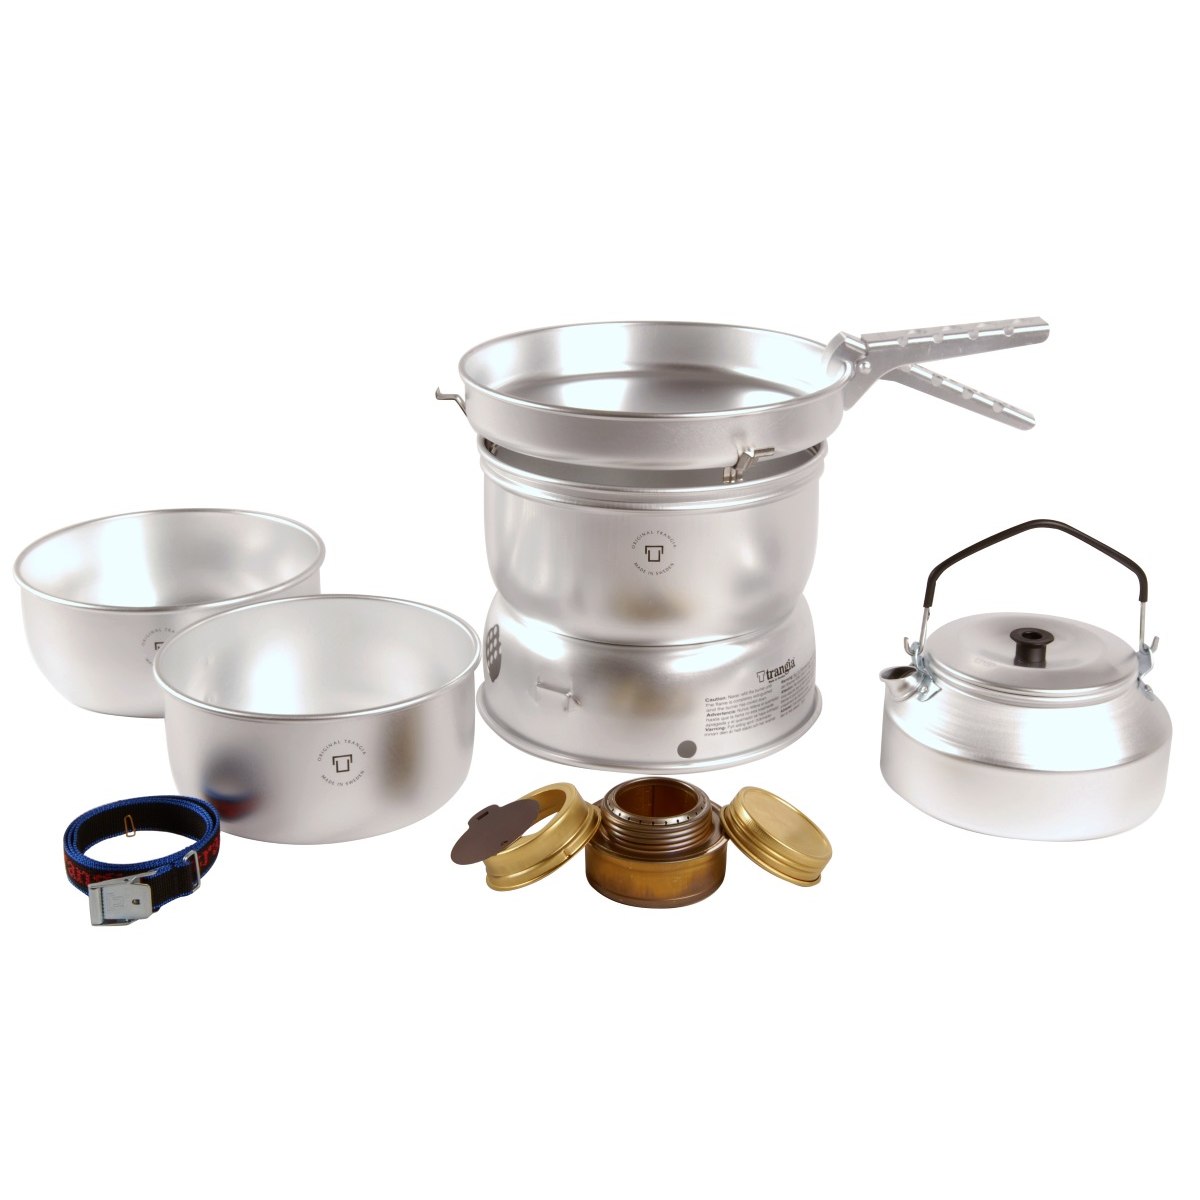 Picture of Trangia Storm Cooker 25-2 UL - Stove System with Kettle